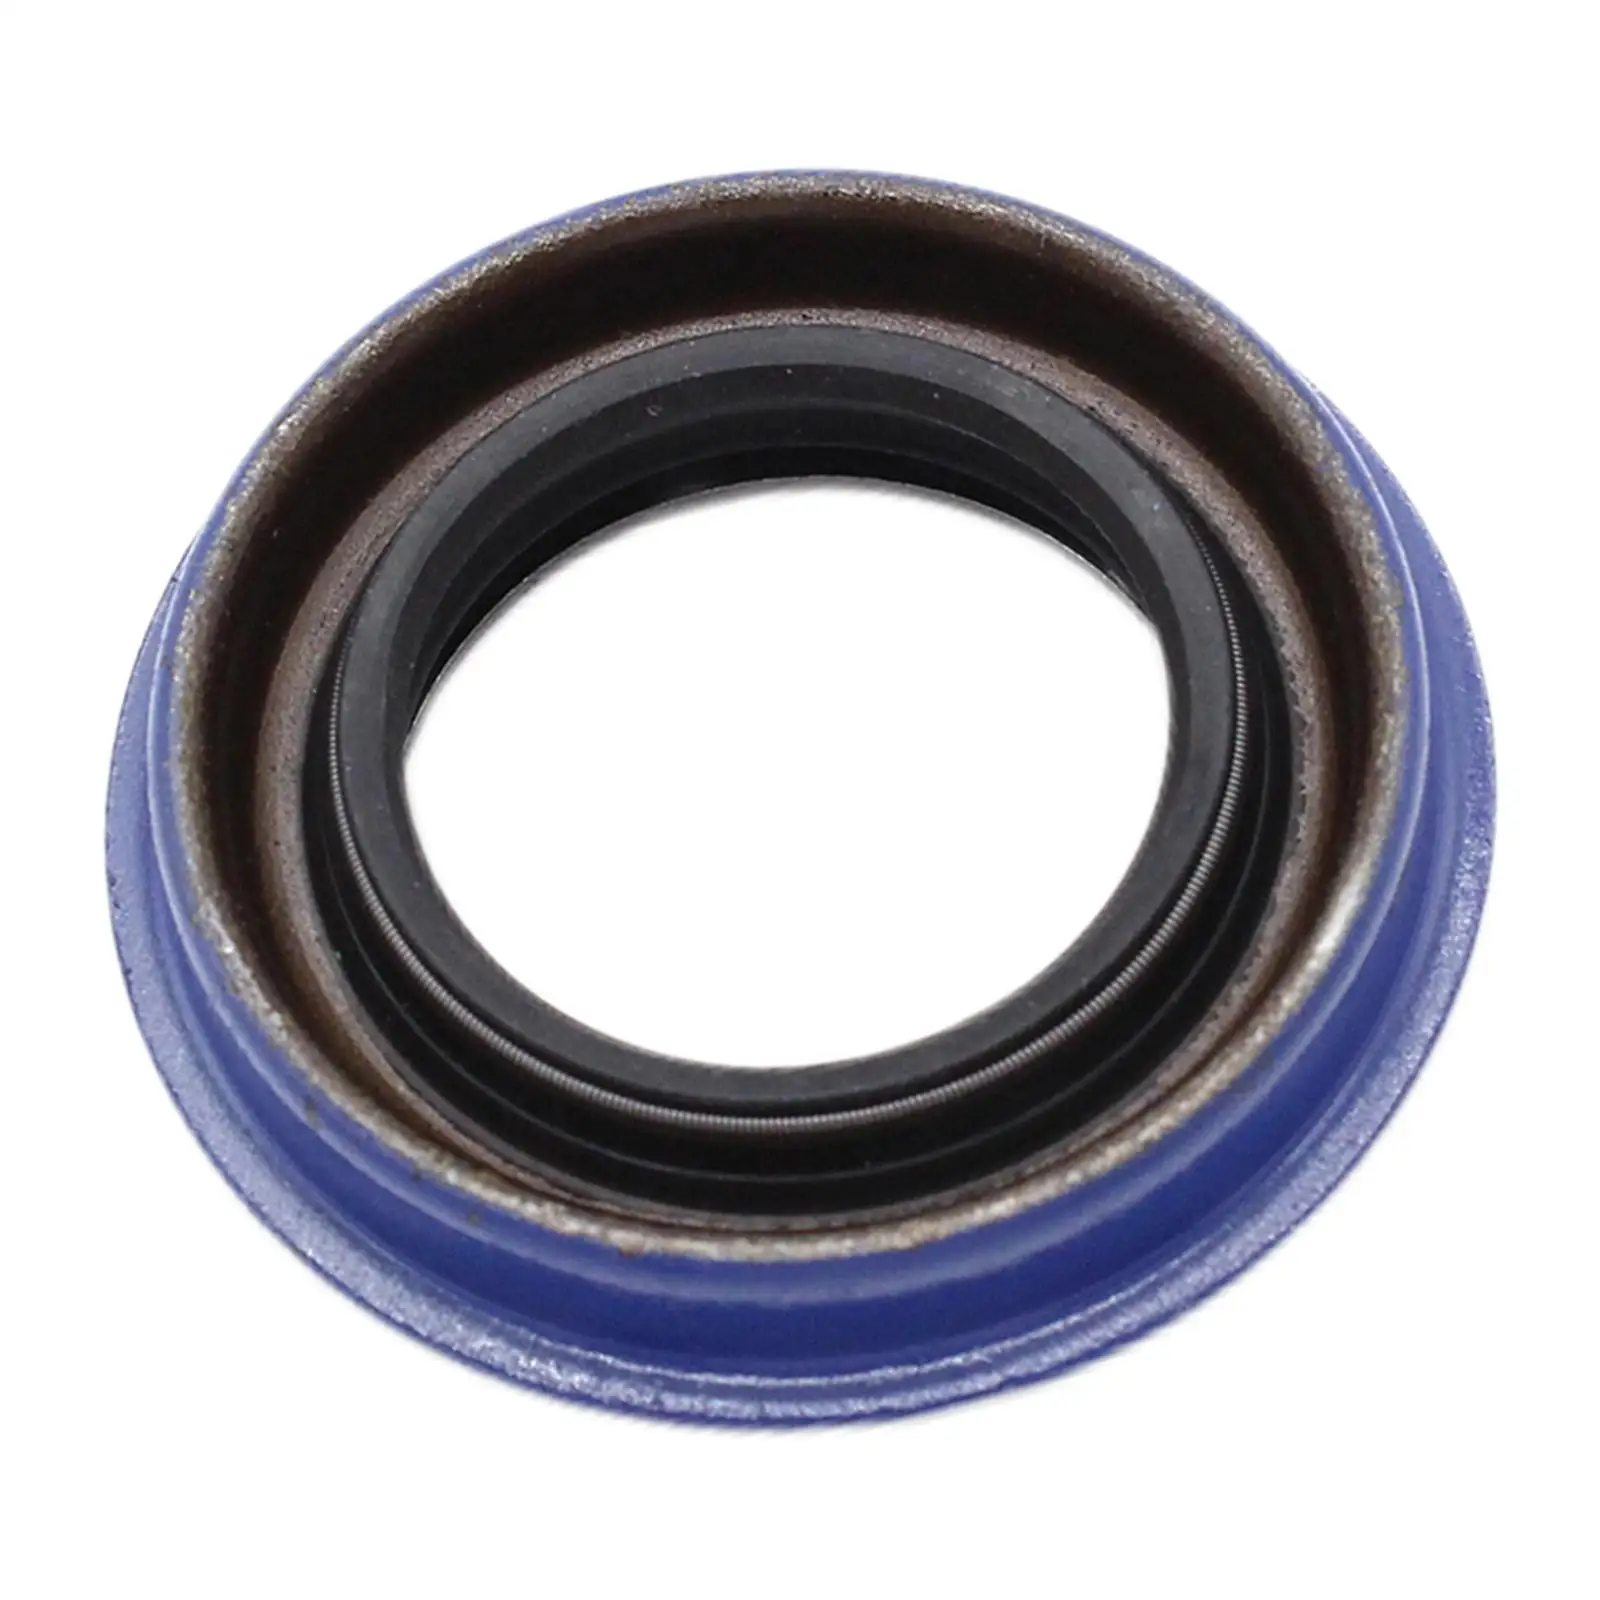 Drive Shaft Oil Seal, 12755013 Replace Engine Axle Shaft Seal for Vauxhall for Opel Sintra Cascada Insignia F40